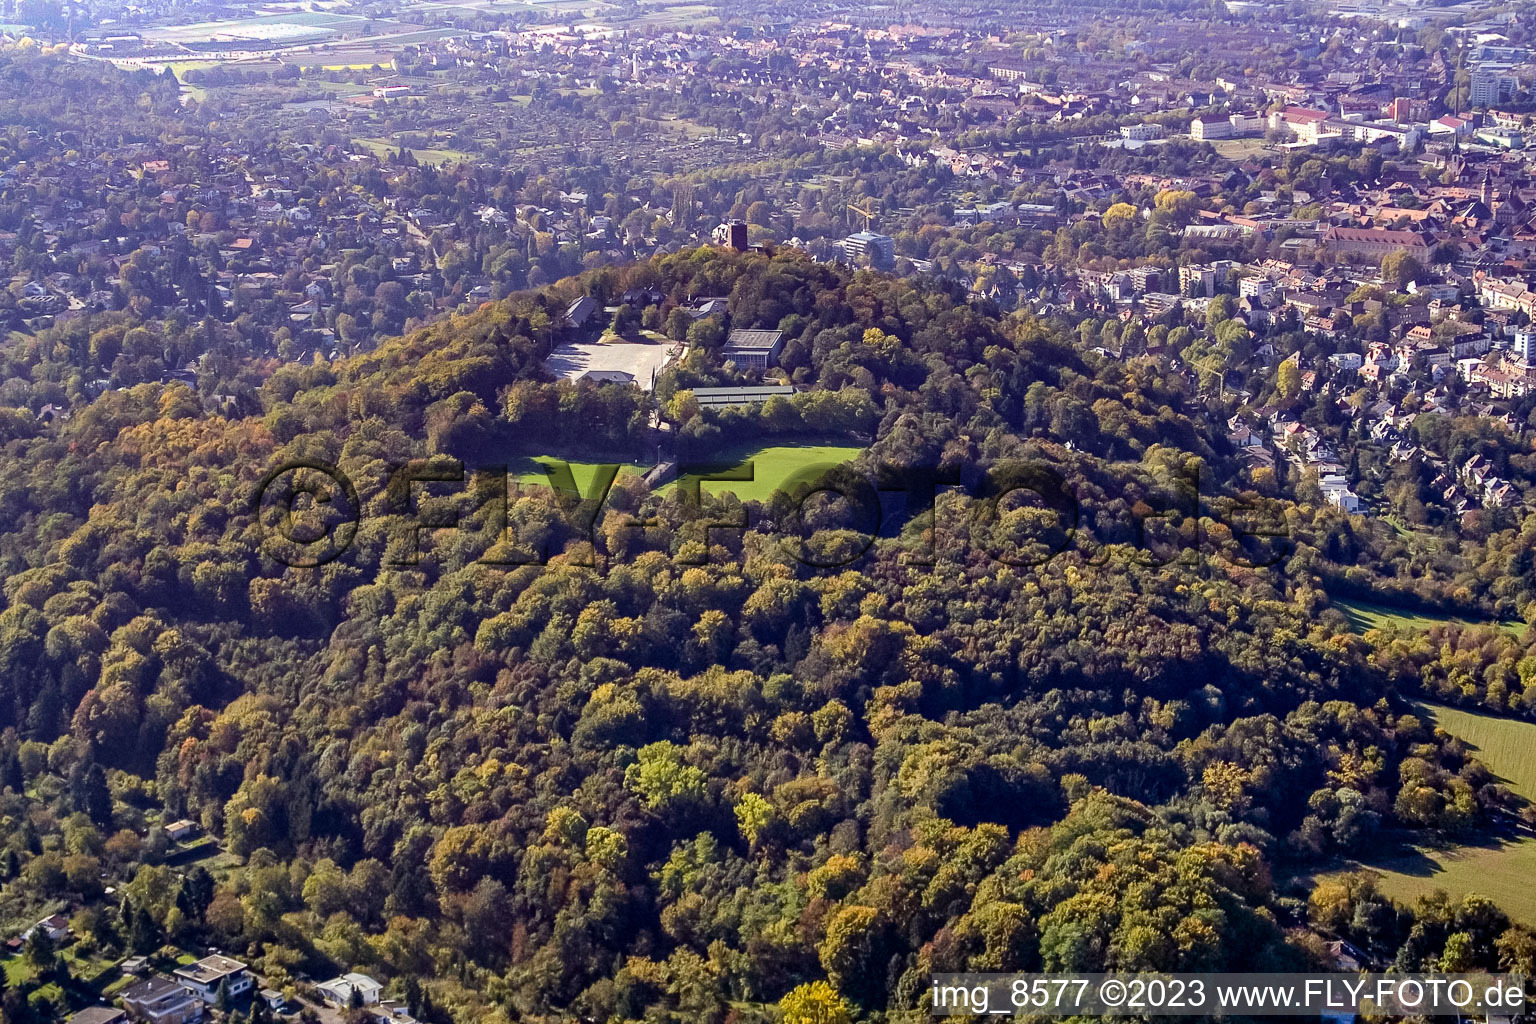 Aerial photograpy of Turmberg from the east in the district Durlach in Karlsruhe in the state Baden-Wuerttemberg, Germany